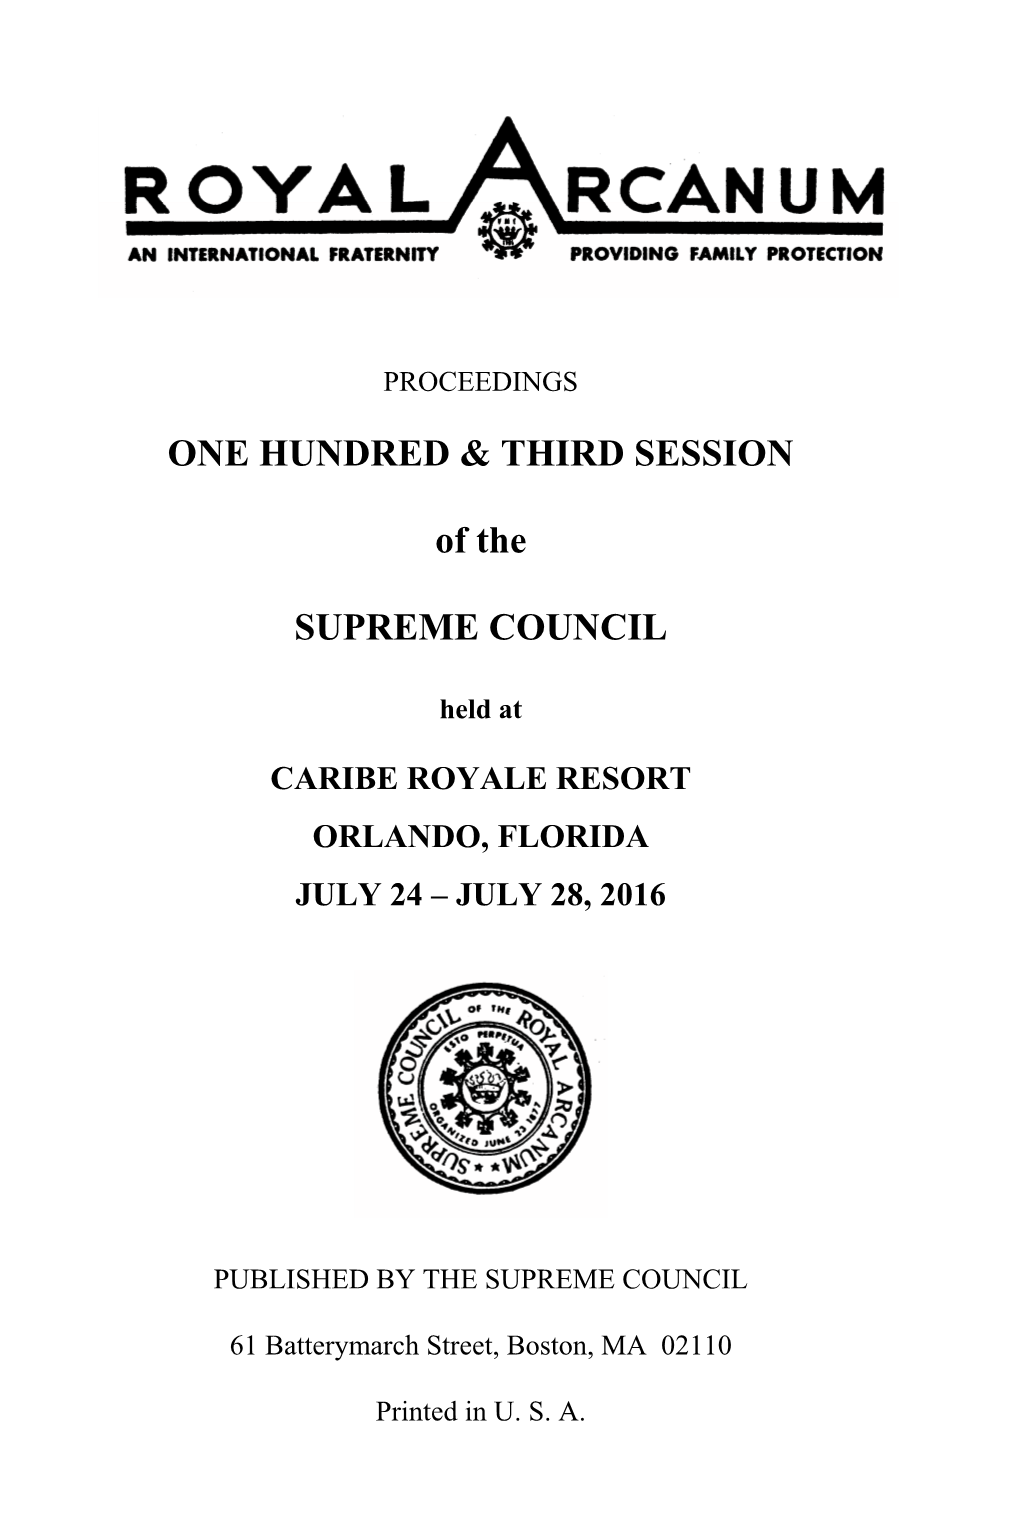 ONE HUNDRED & THIRD SESSION of the SUPREME COUNCIL